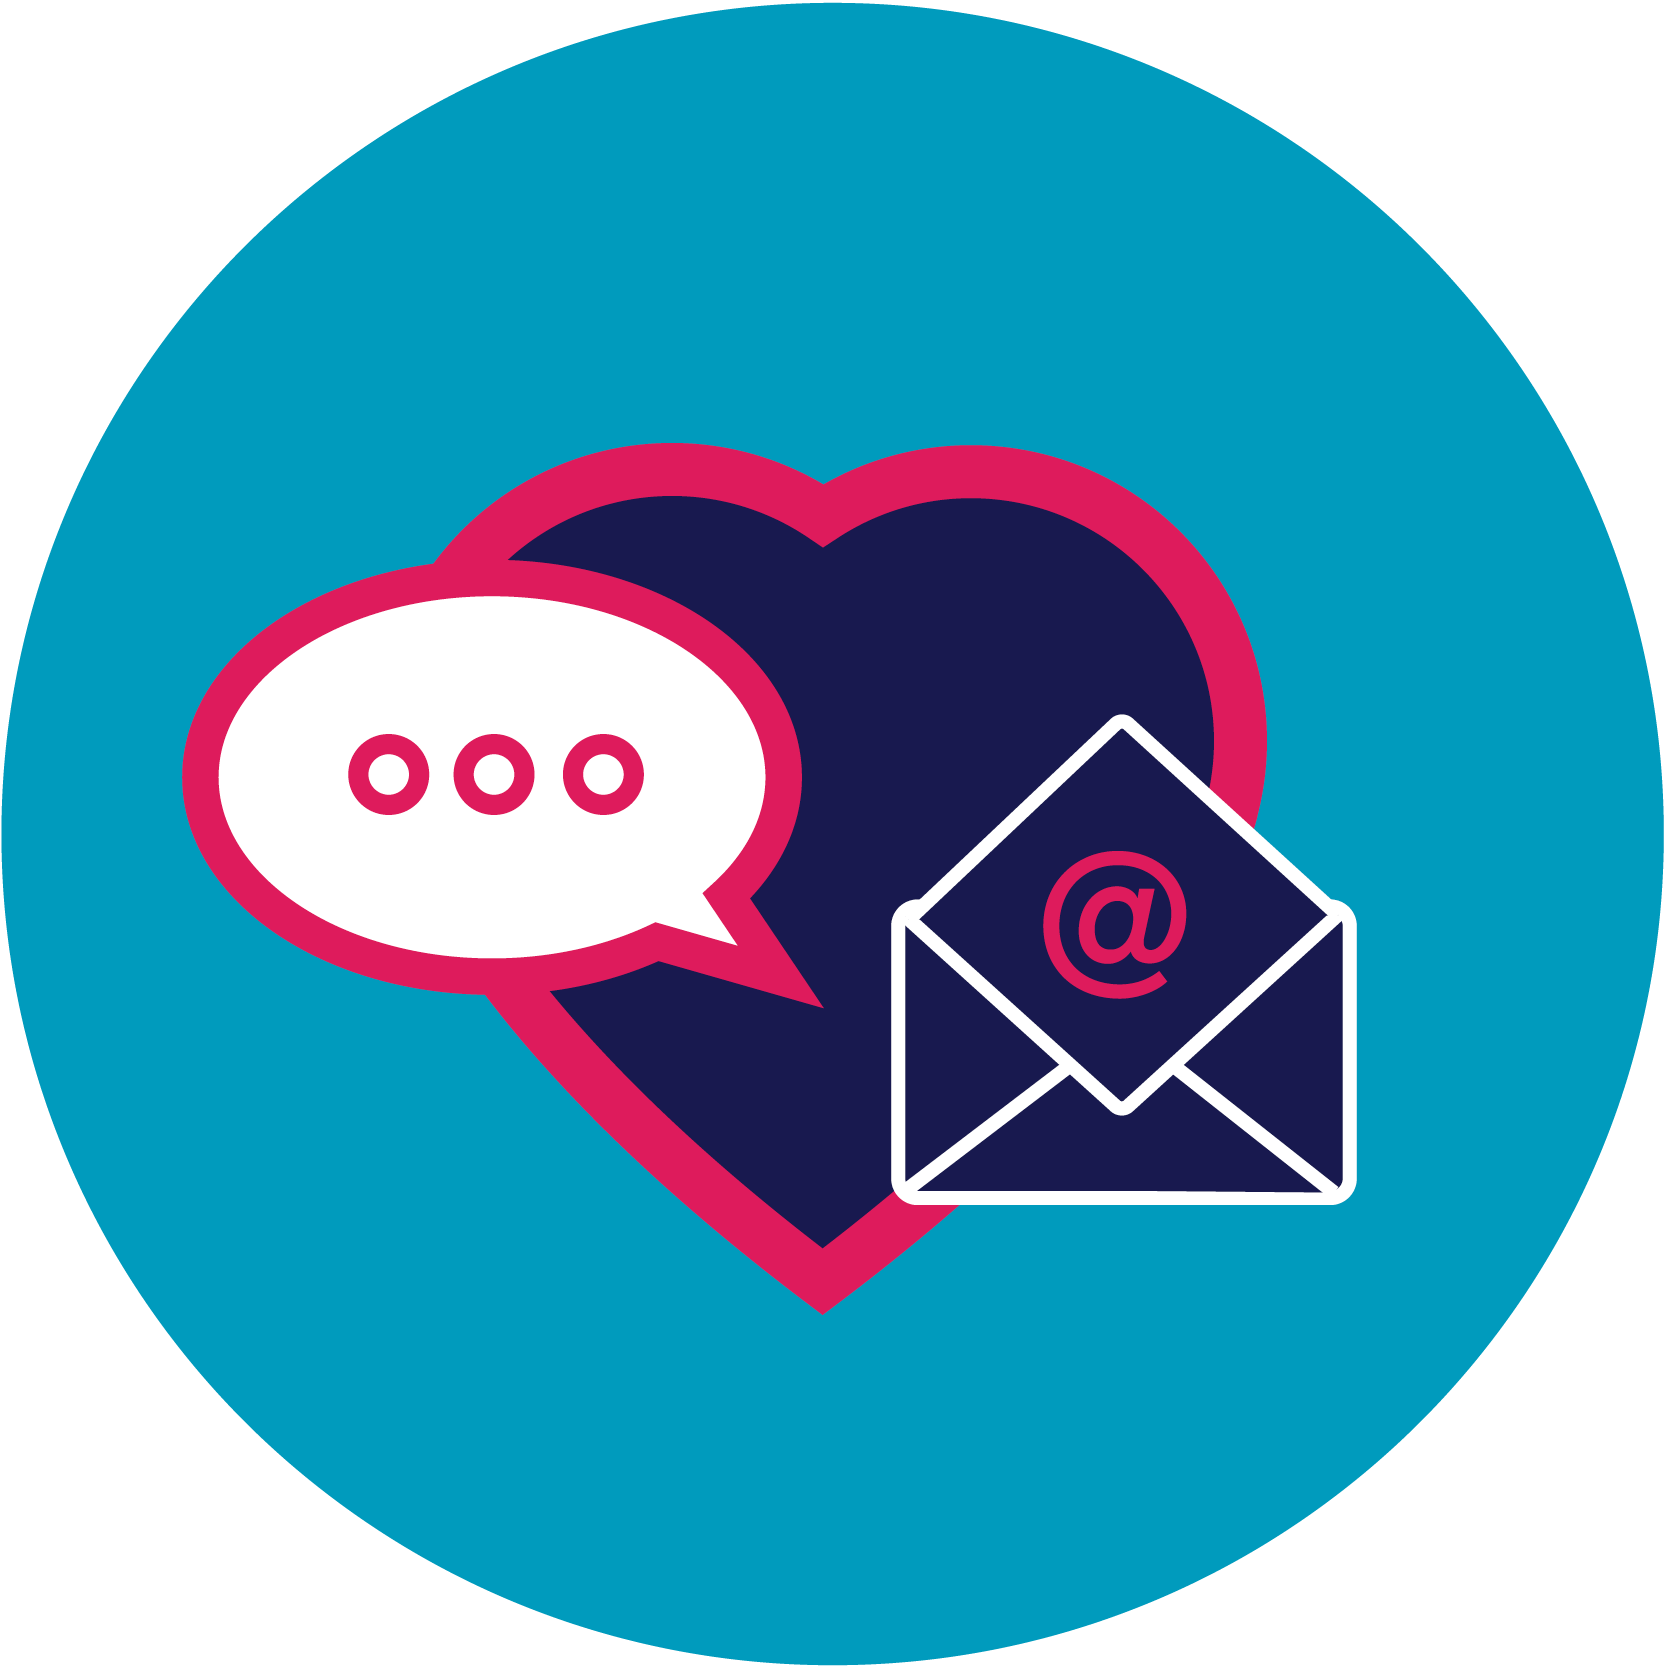 Study logo - illustration of a heart overlaid with an email icon and speech bubble